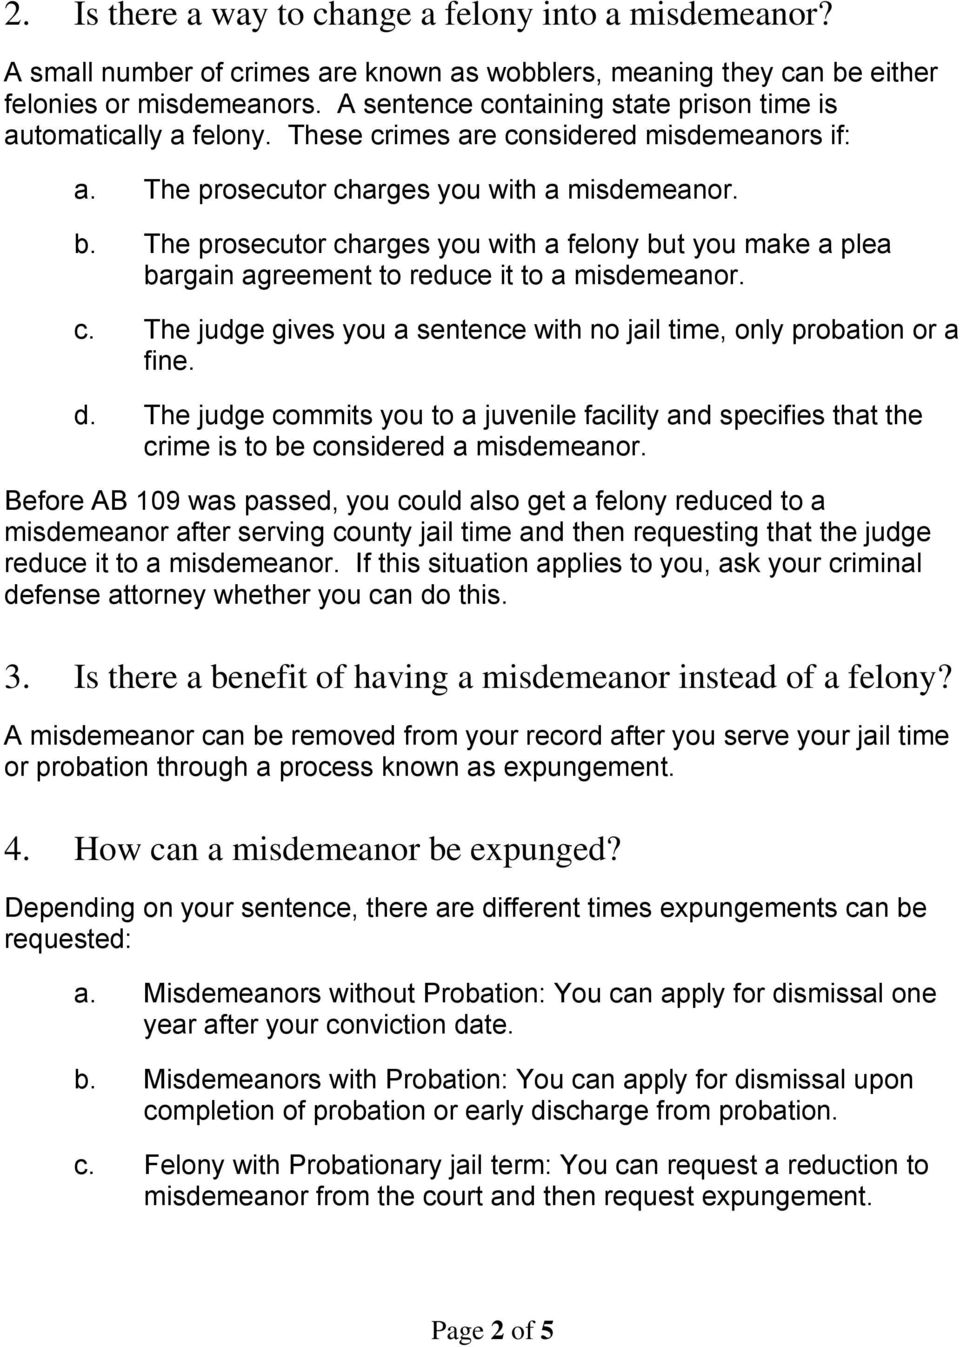 The prosecutor charges you with a felony but you make a plea bargain agreement to reduce it to a misdemeanor. c. The judge gives you a sentence with no jail time, only probation or a fine. d.